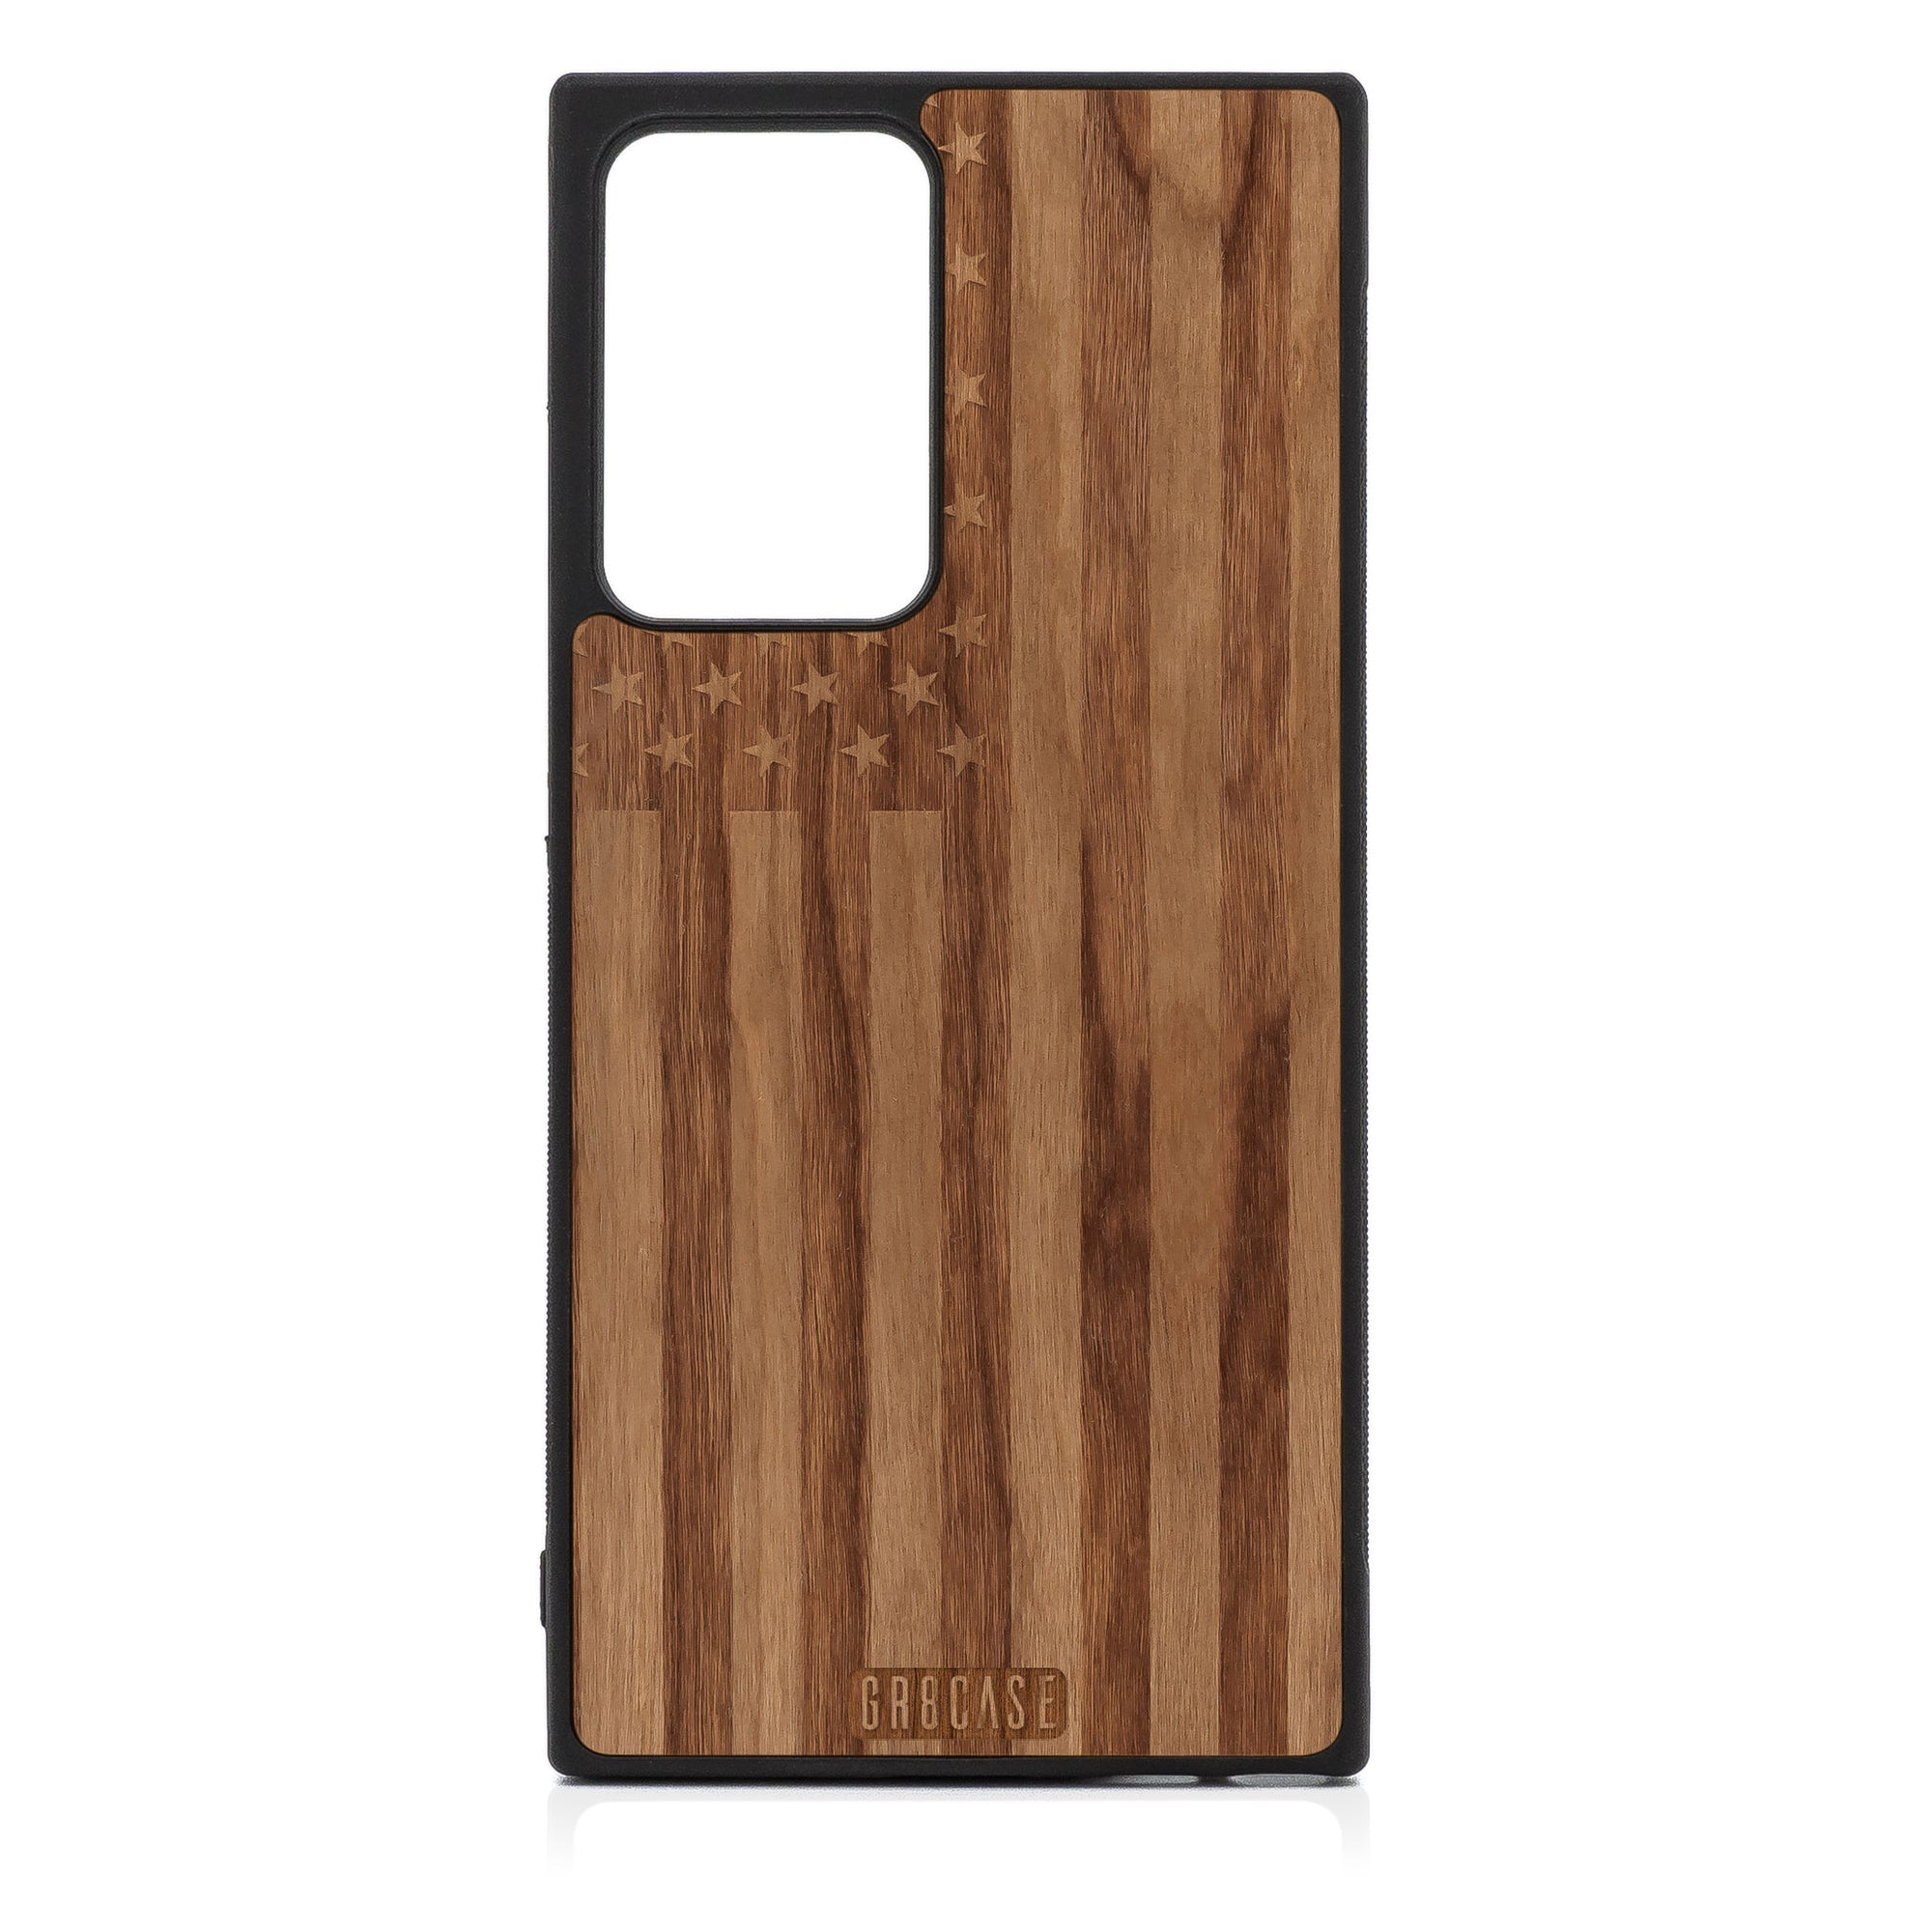 USA Flag Design Wood Case For Samsung Galaxy Note 20 Ultra